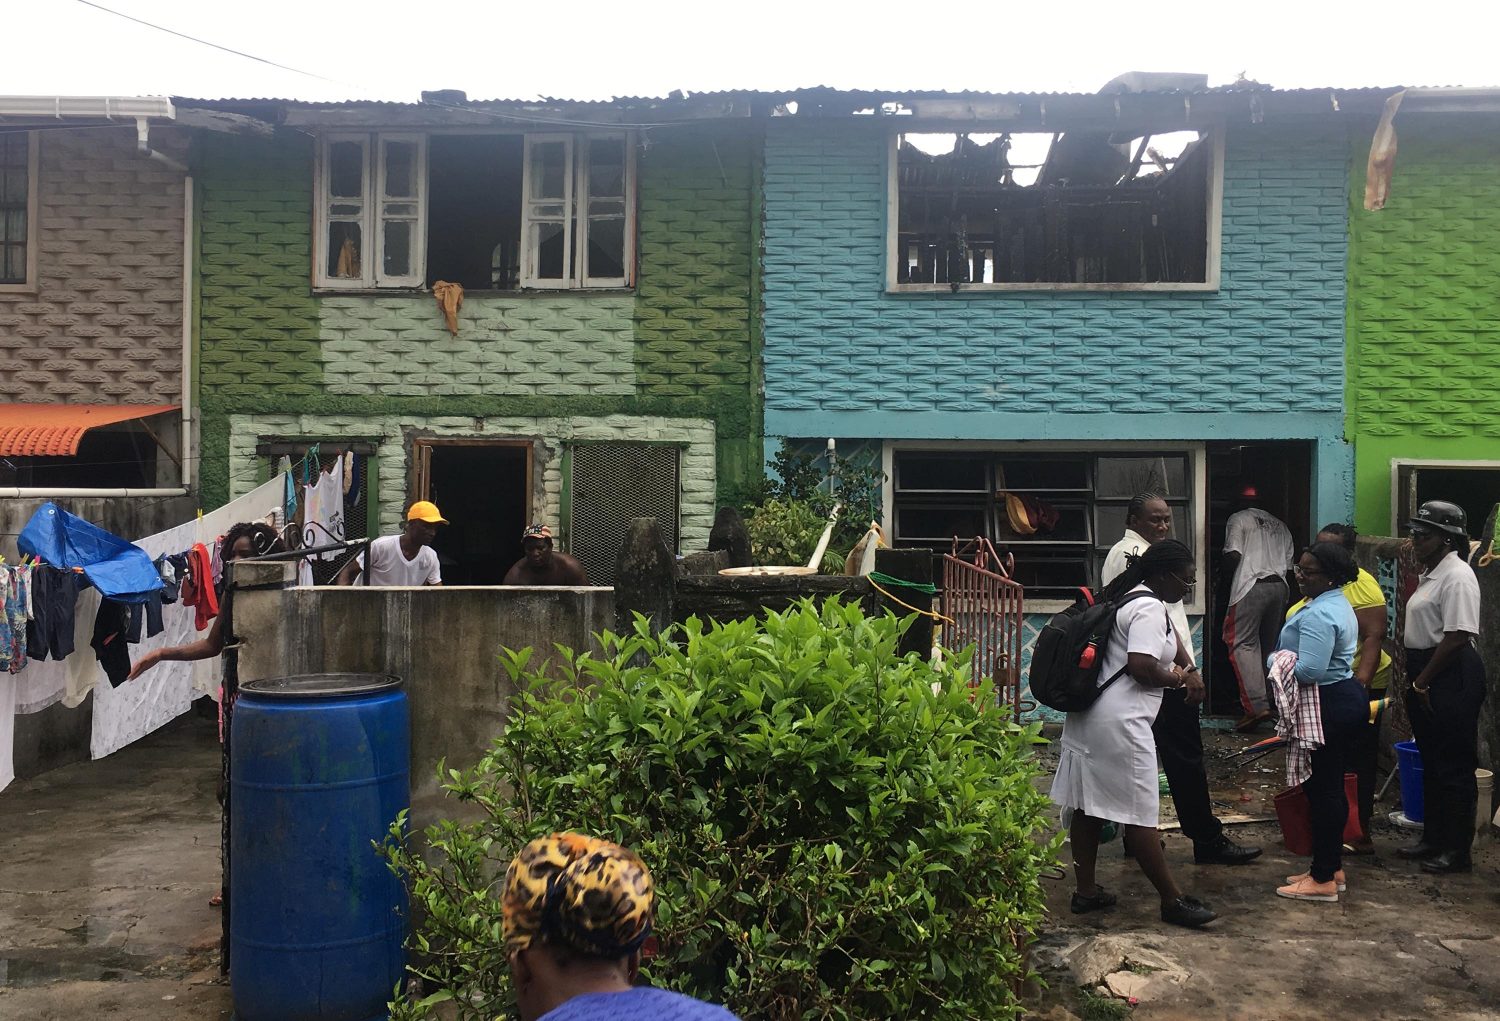 Neighbours gather around the destroyed apartment (right) trying to salvage anything that might not have been destroyed by the fire.